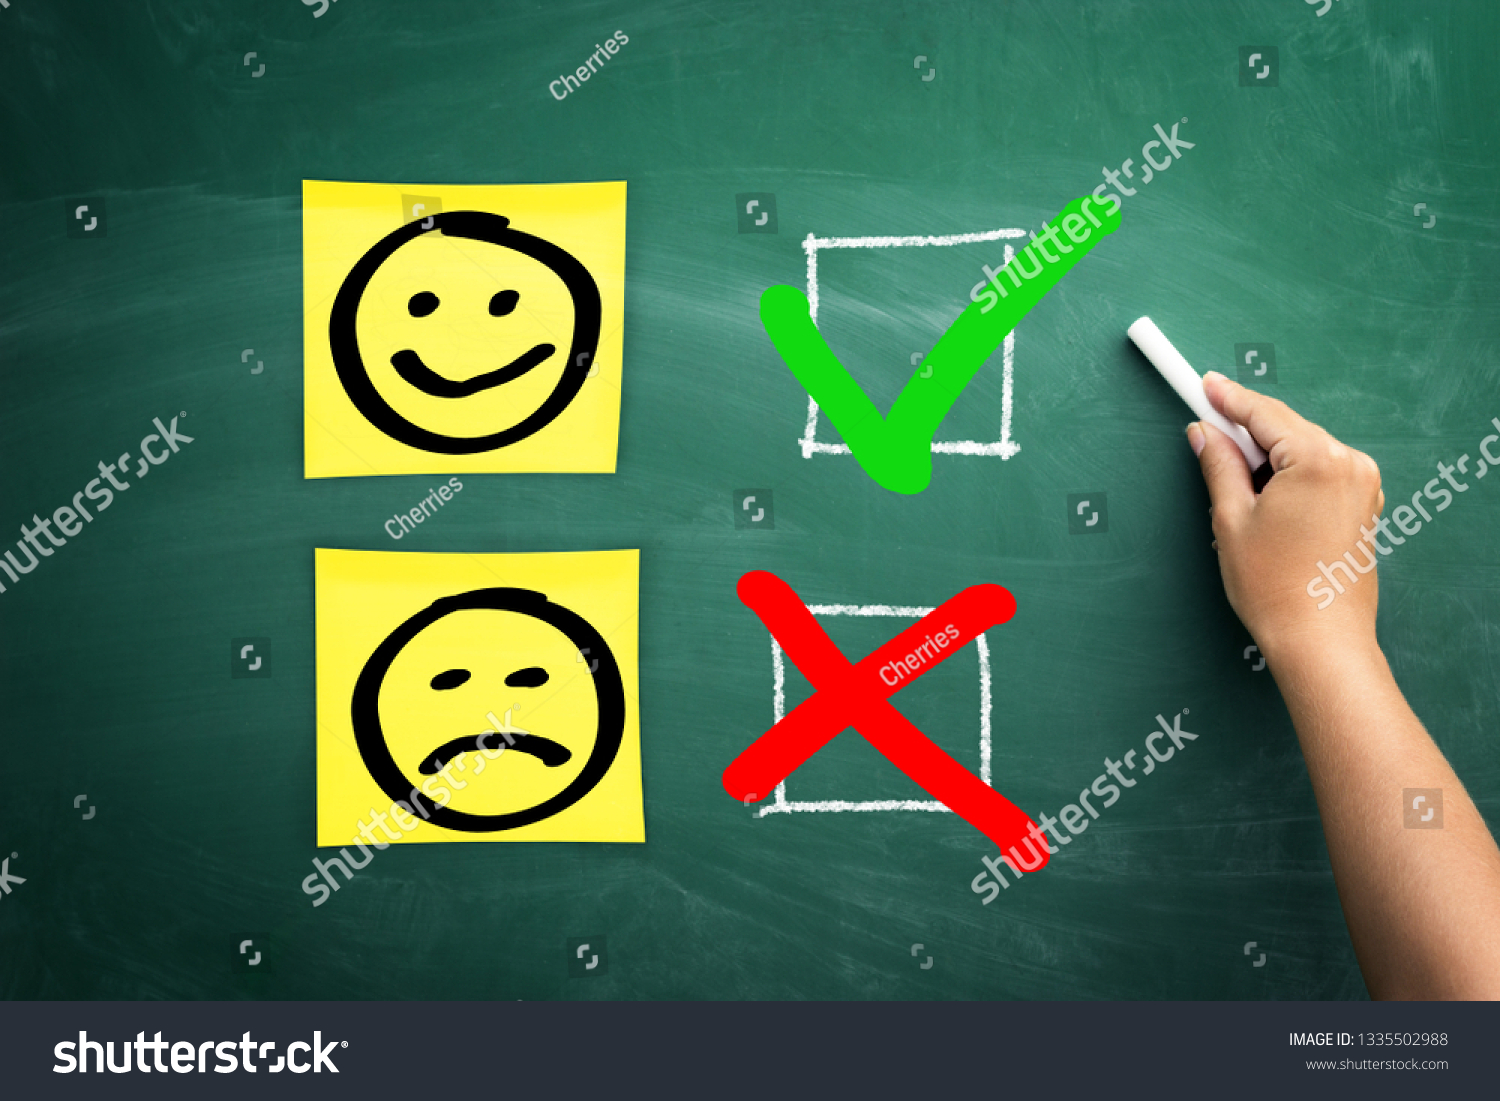 Be positive, choose to be positive, think to be positive. On the school board was checked emotion face  with a smile  #1335502988